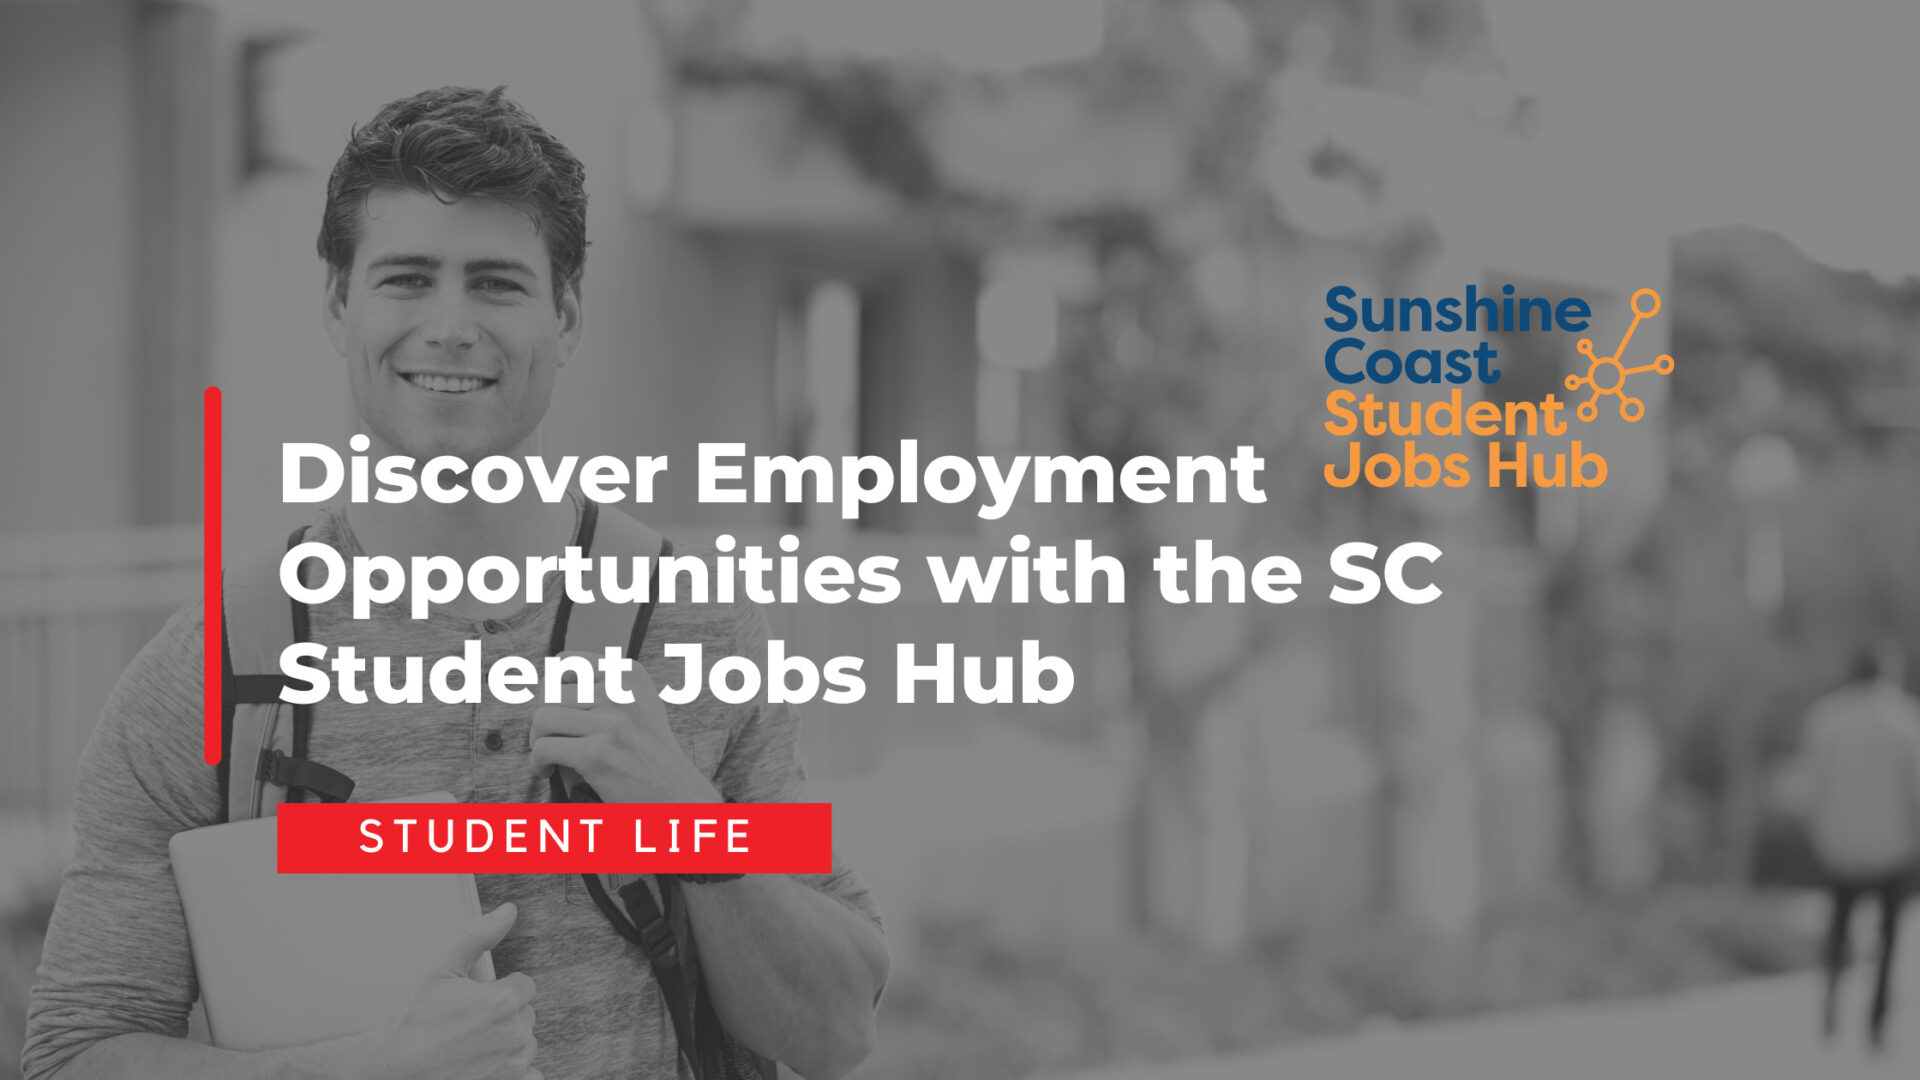 Discover Employment Opportunities with the SC Student Jobs Hub